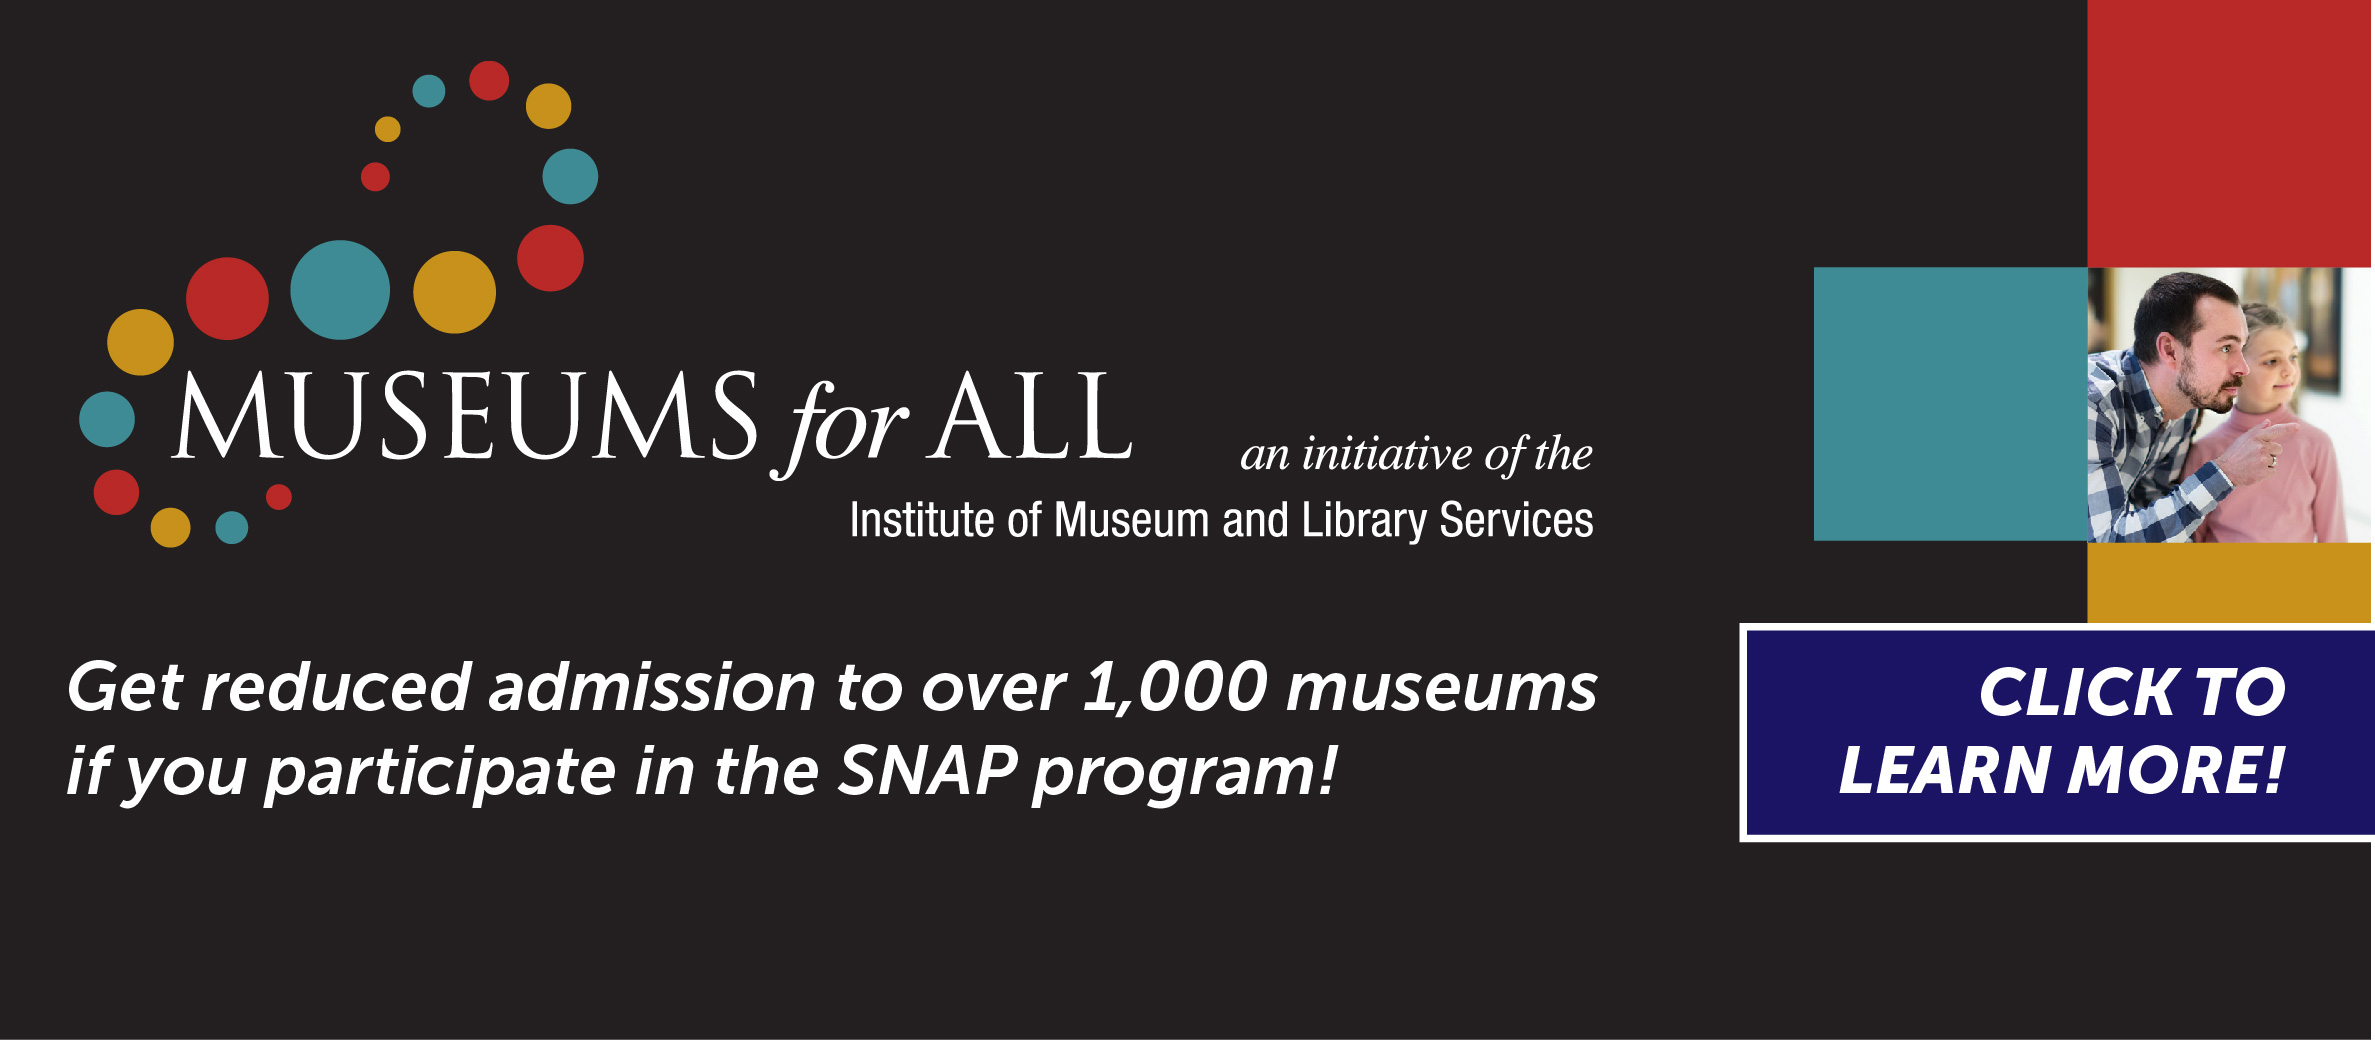 Learn more about getting reduced admission to over 1,000 museums 
if you participate in the SNAP program! 